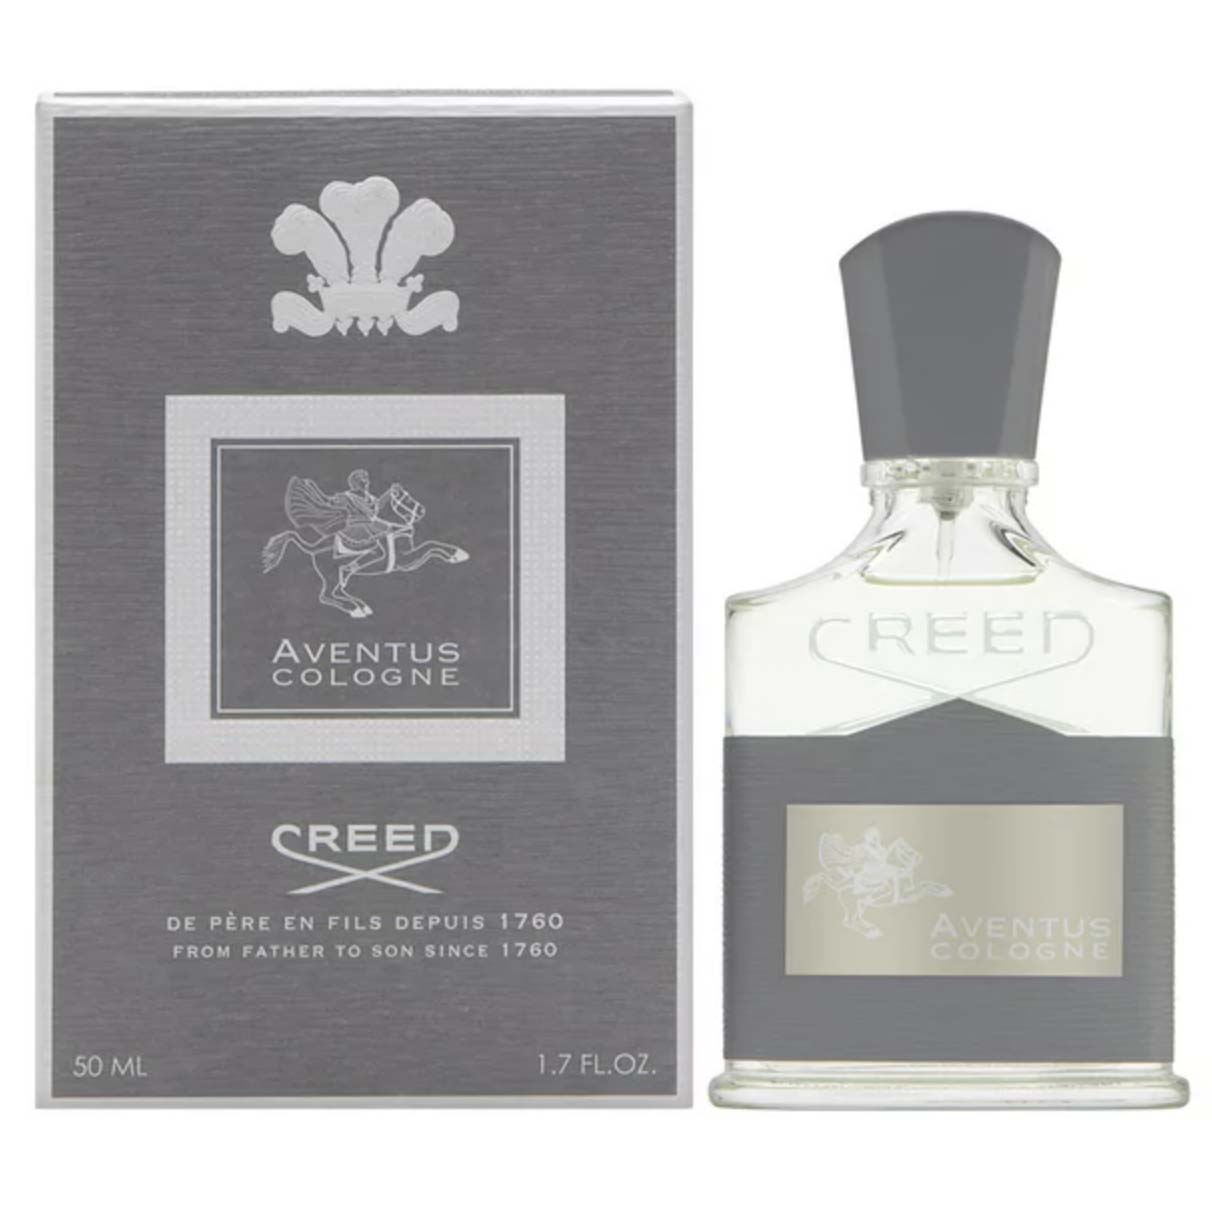 Creed Men's Creed Aventus Cologne in clear grey bottle and grey box packaging